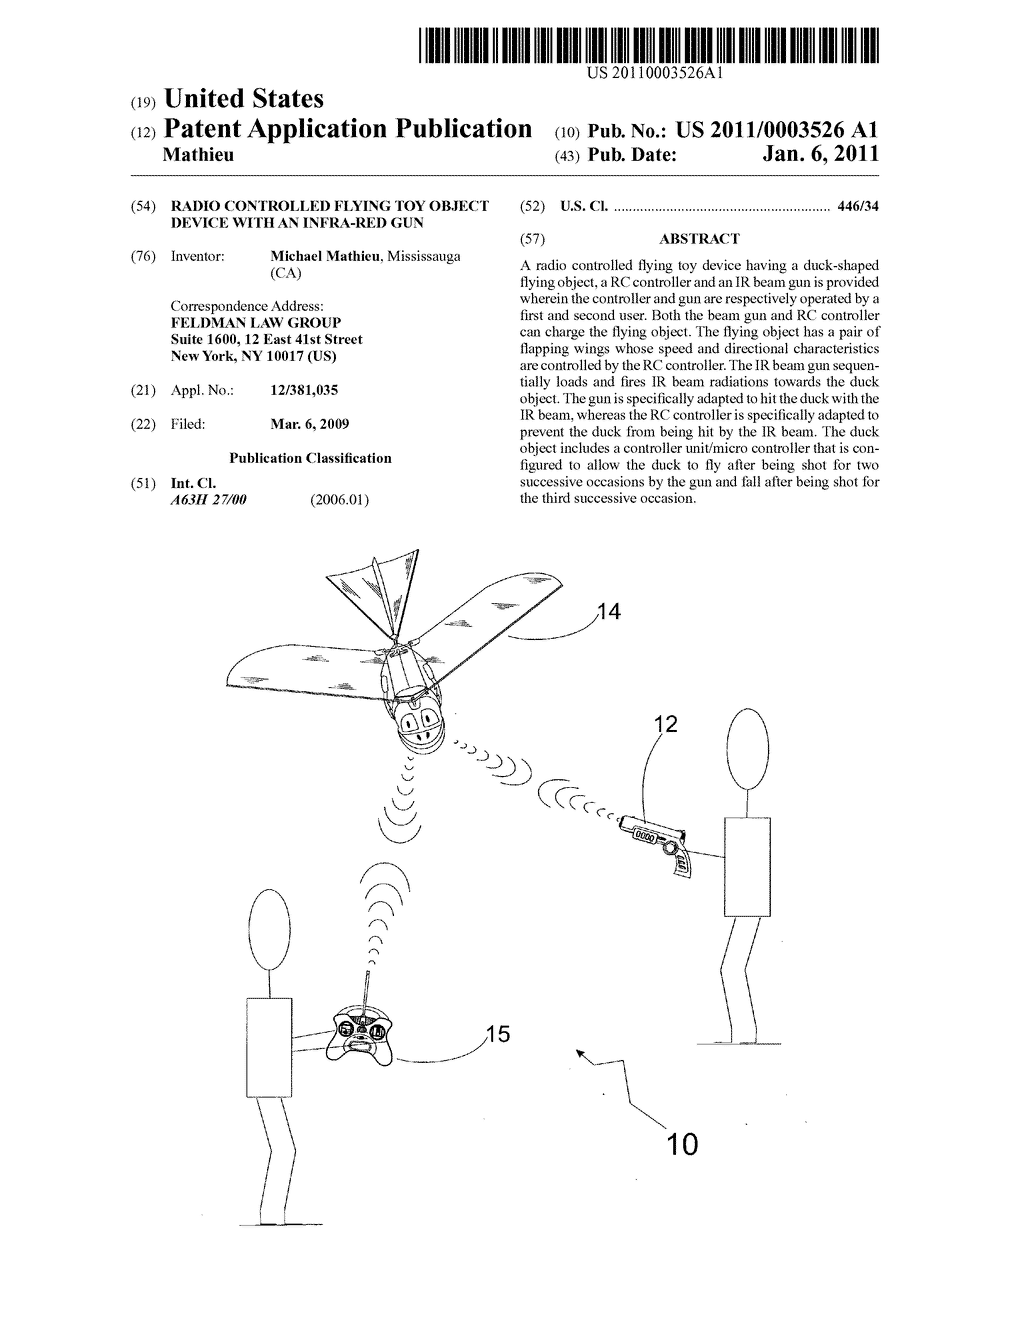 Radio controlled flying toy object device with an infra-red gun - diagram, schematic, and image 01